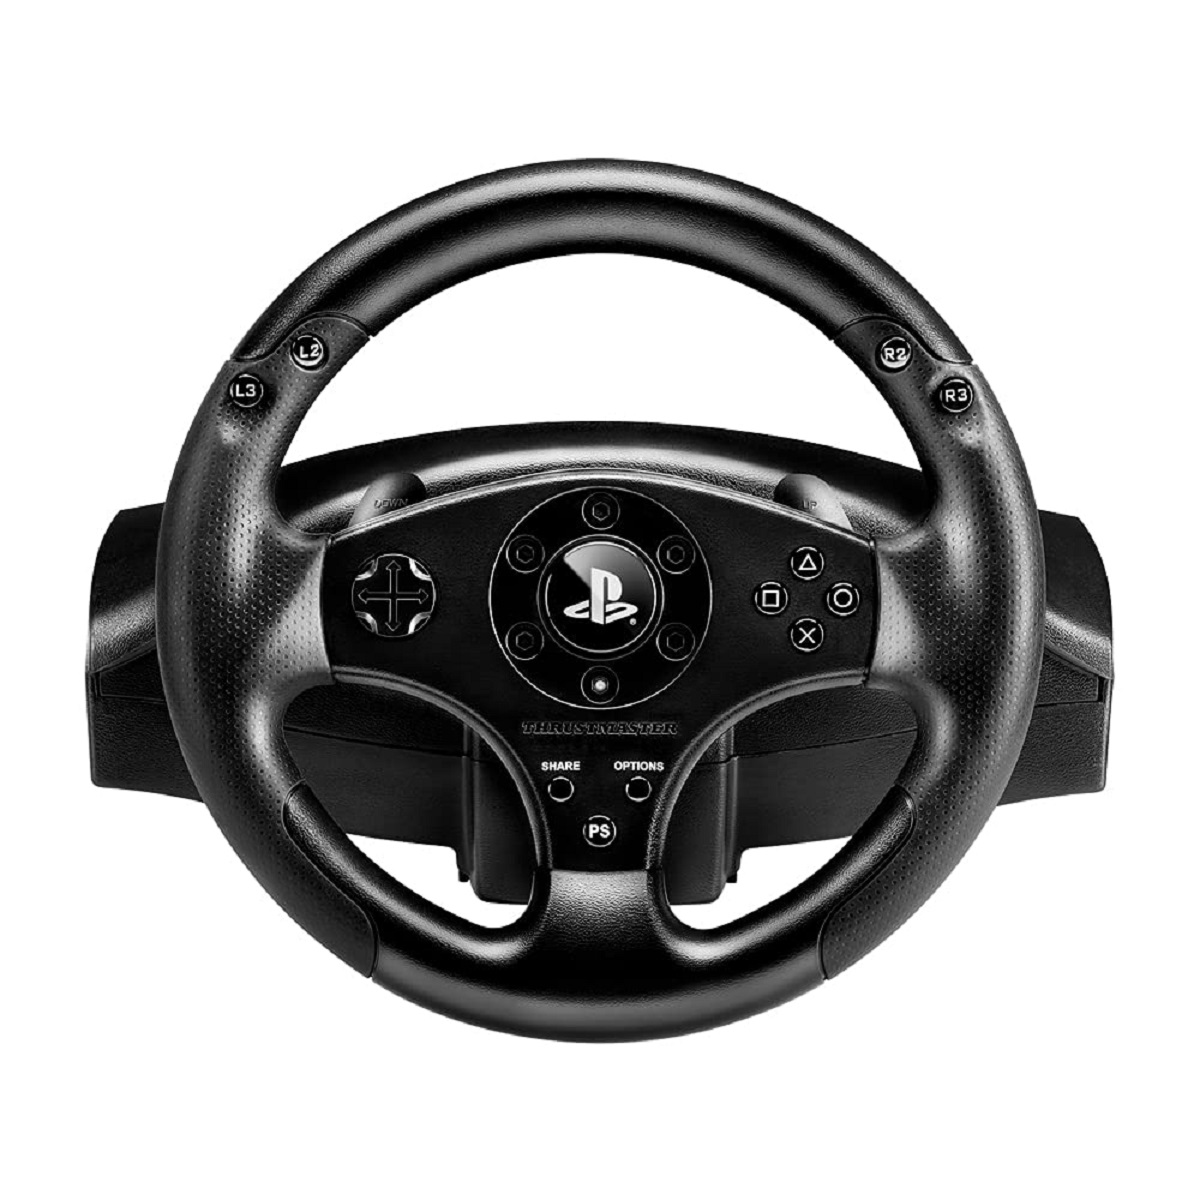 How To Connect T80 Racing Wheel To PC